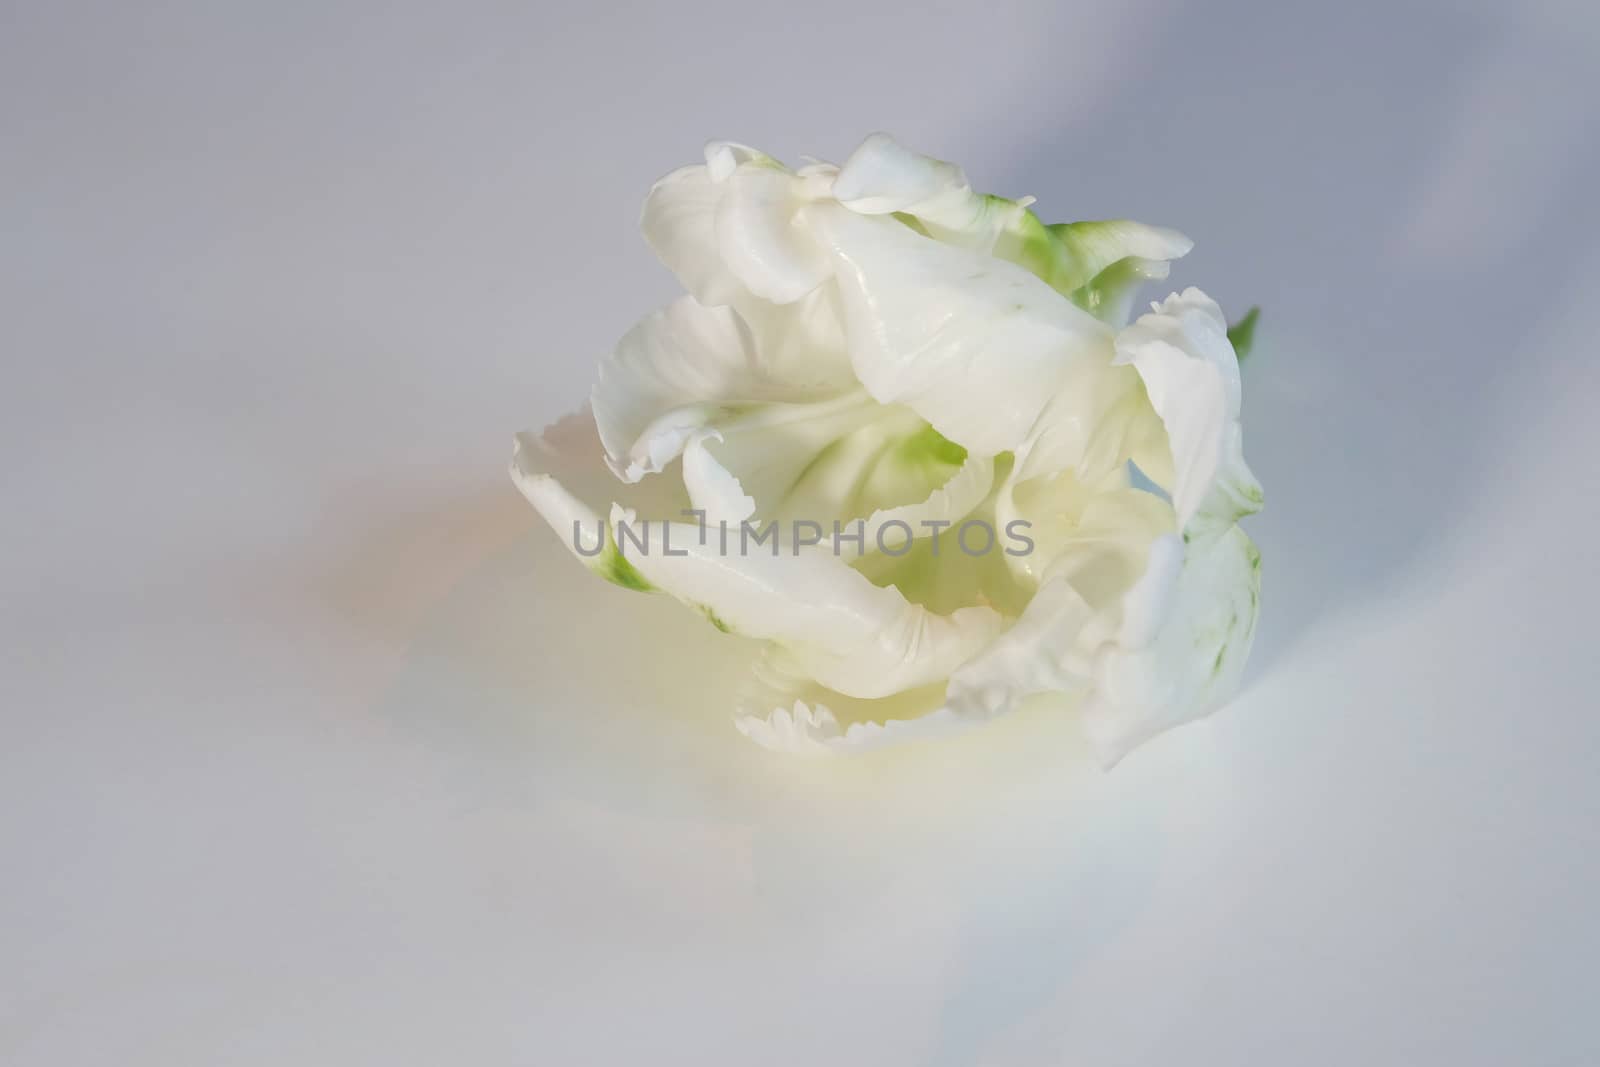 White and green parrot tulip